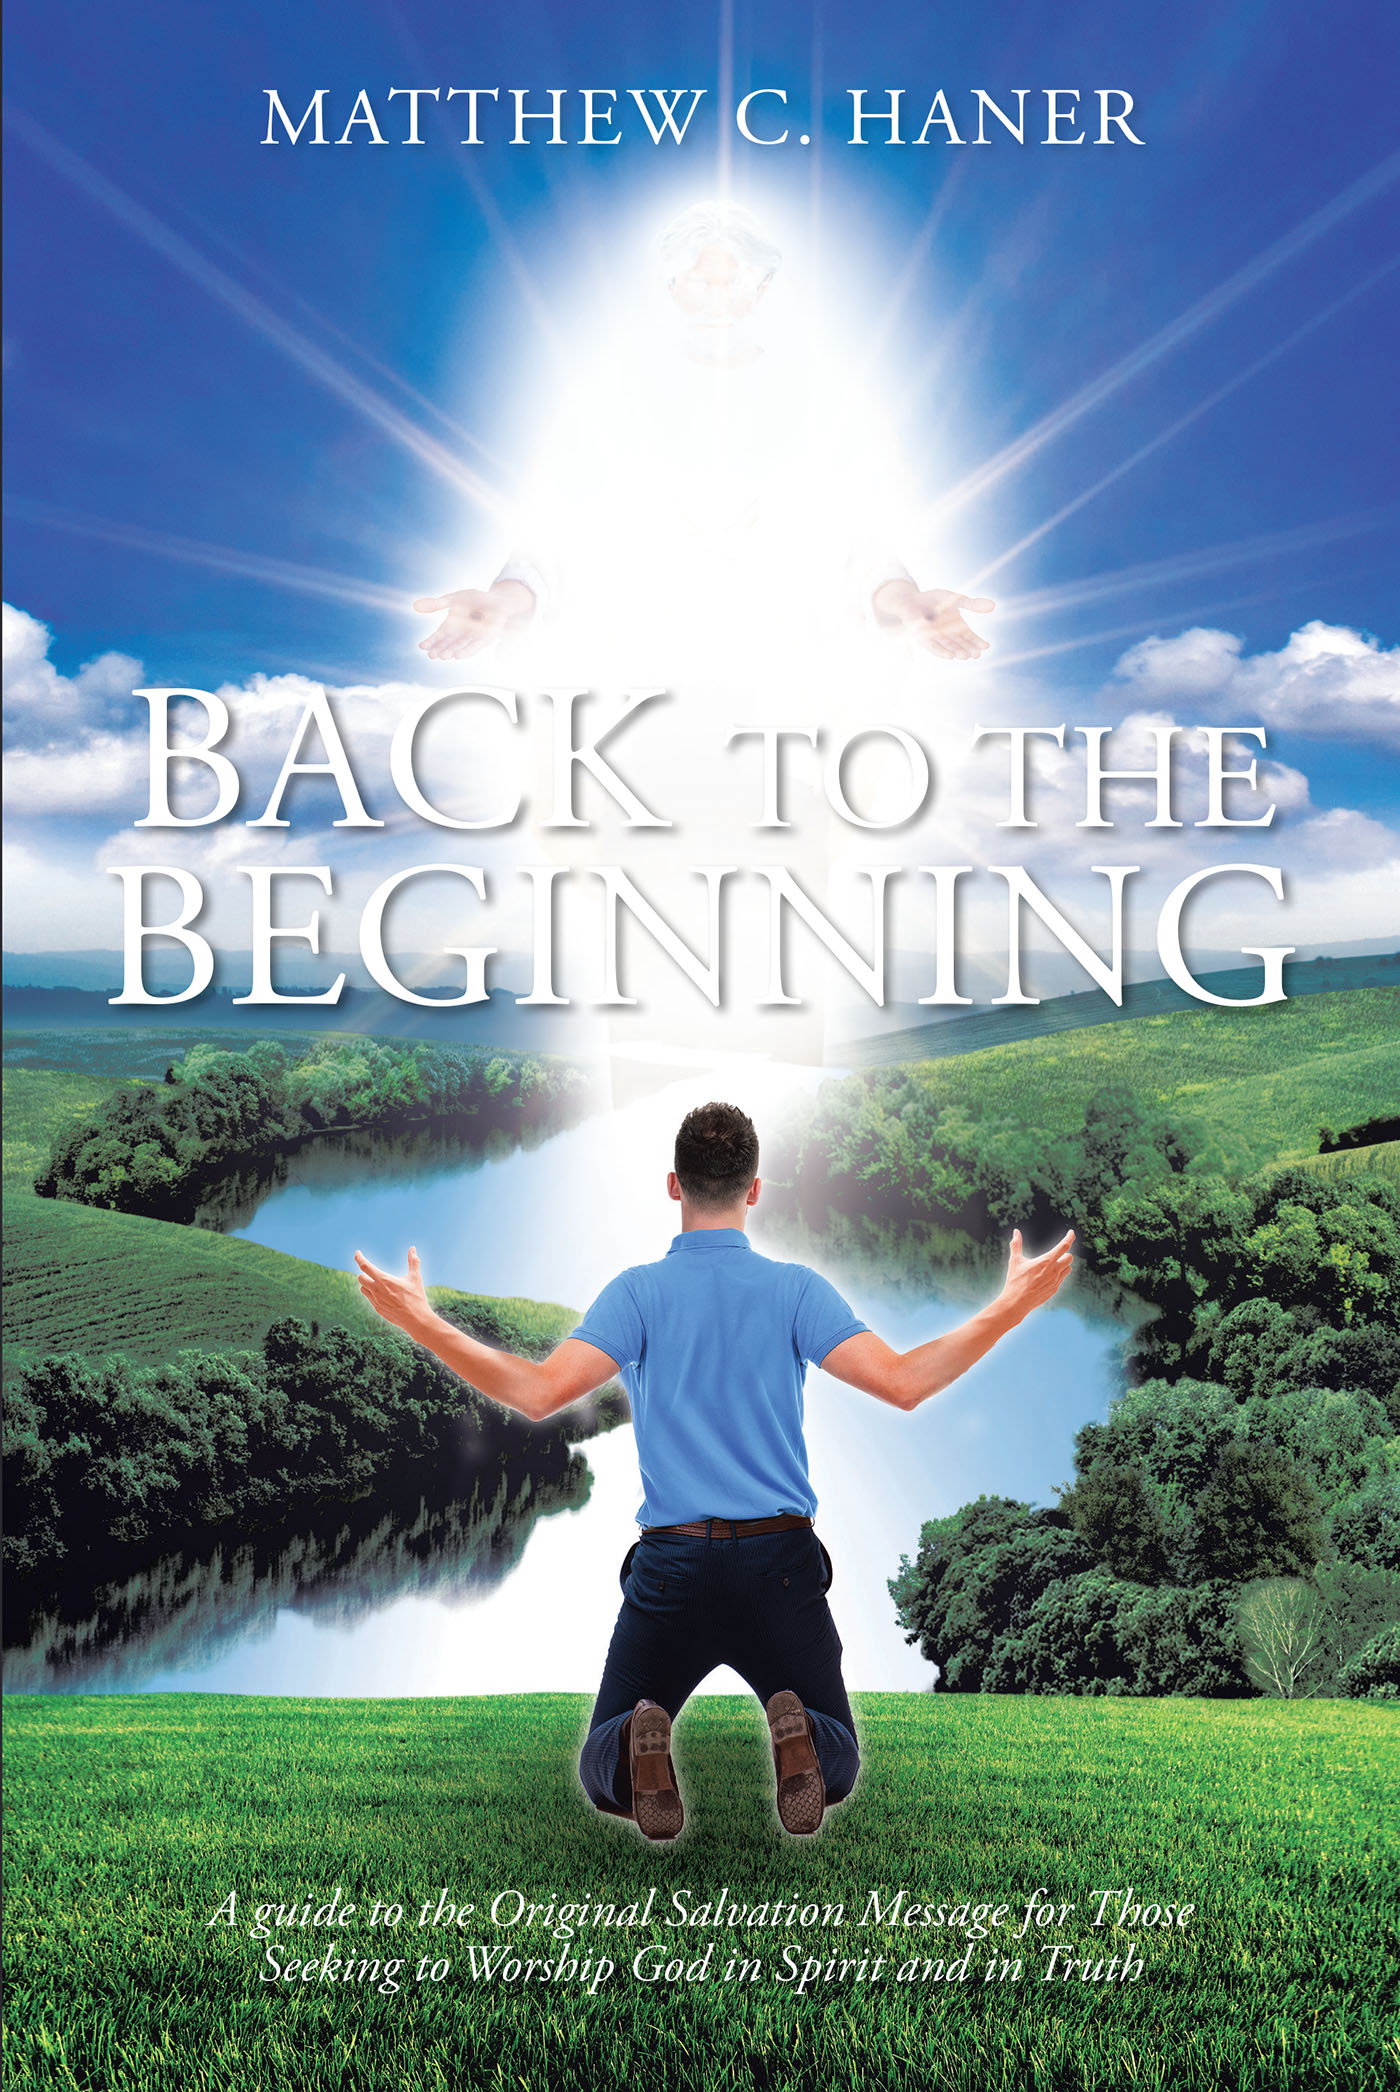 Matthew C. Haner’s Newly Released "Back to The Beginning" is an Articulate and Easy to Follow Bible Study That Takes Readers to the Basics of Christianity